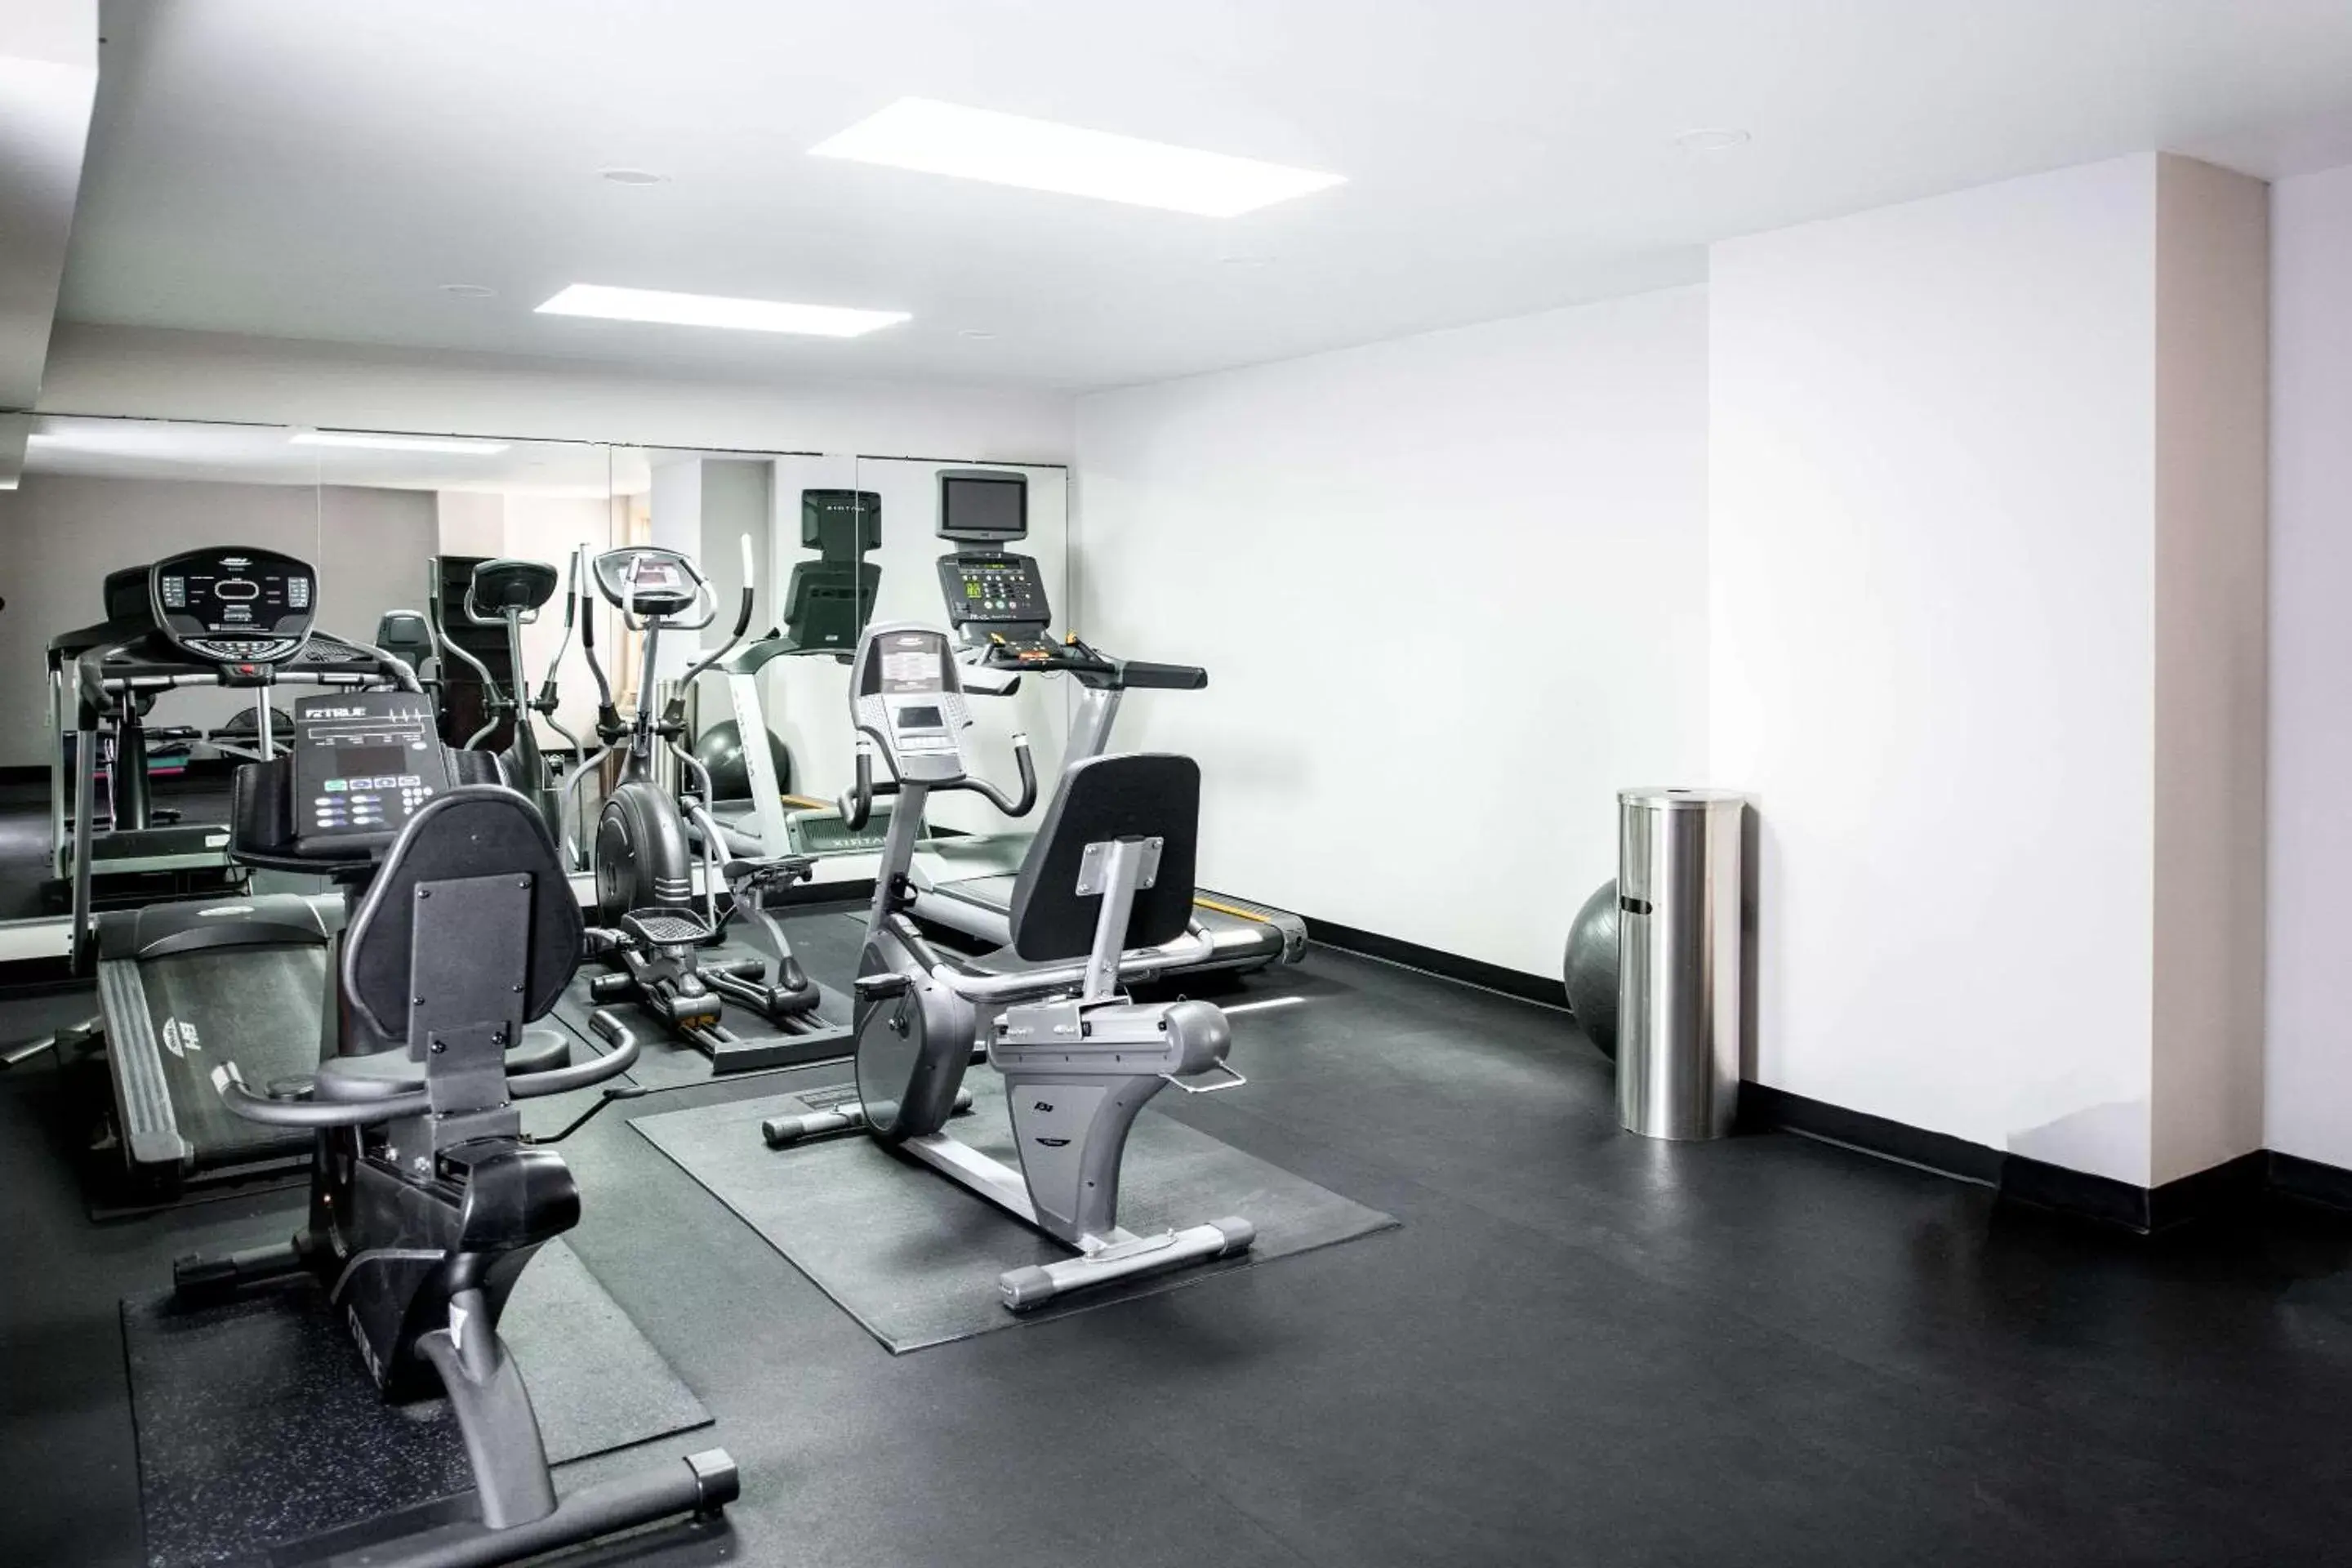 Fitness centre/facilities, Fitness Center/Facilities in Clarion Hotel & Conference Center Leesburg